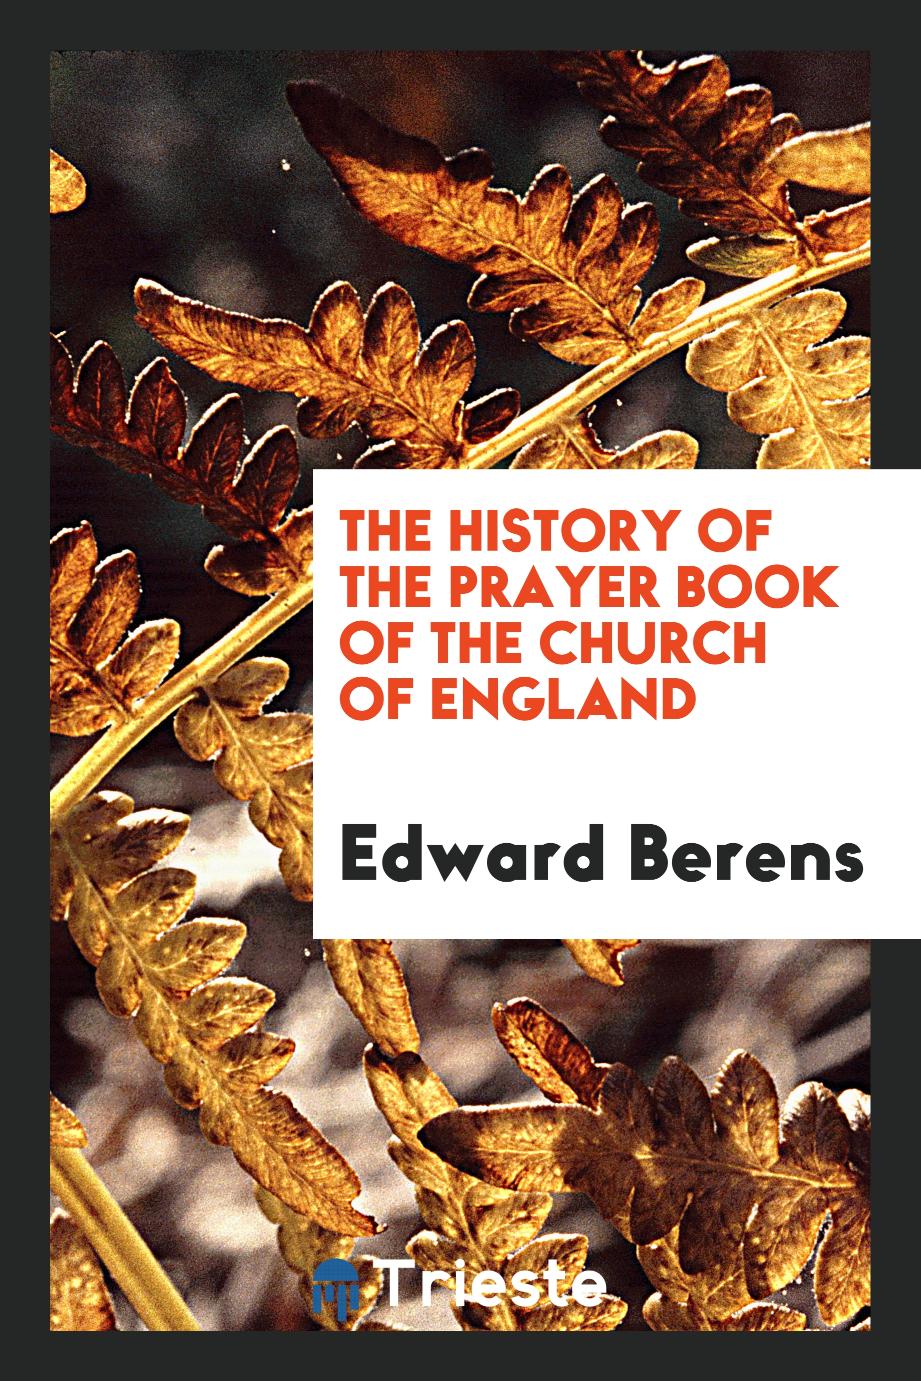 The history of the prayer book of the Church of England